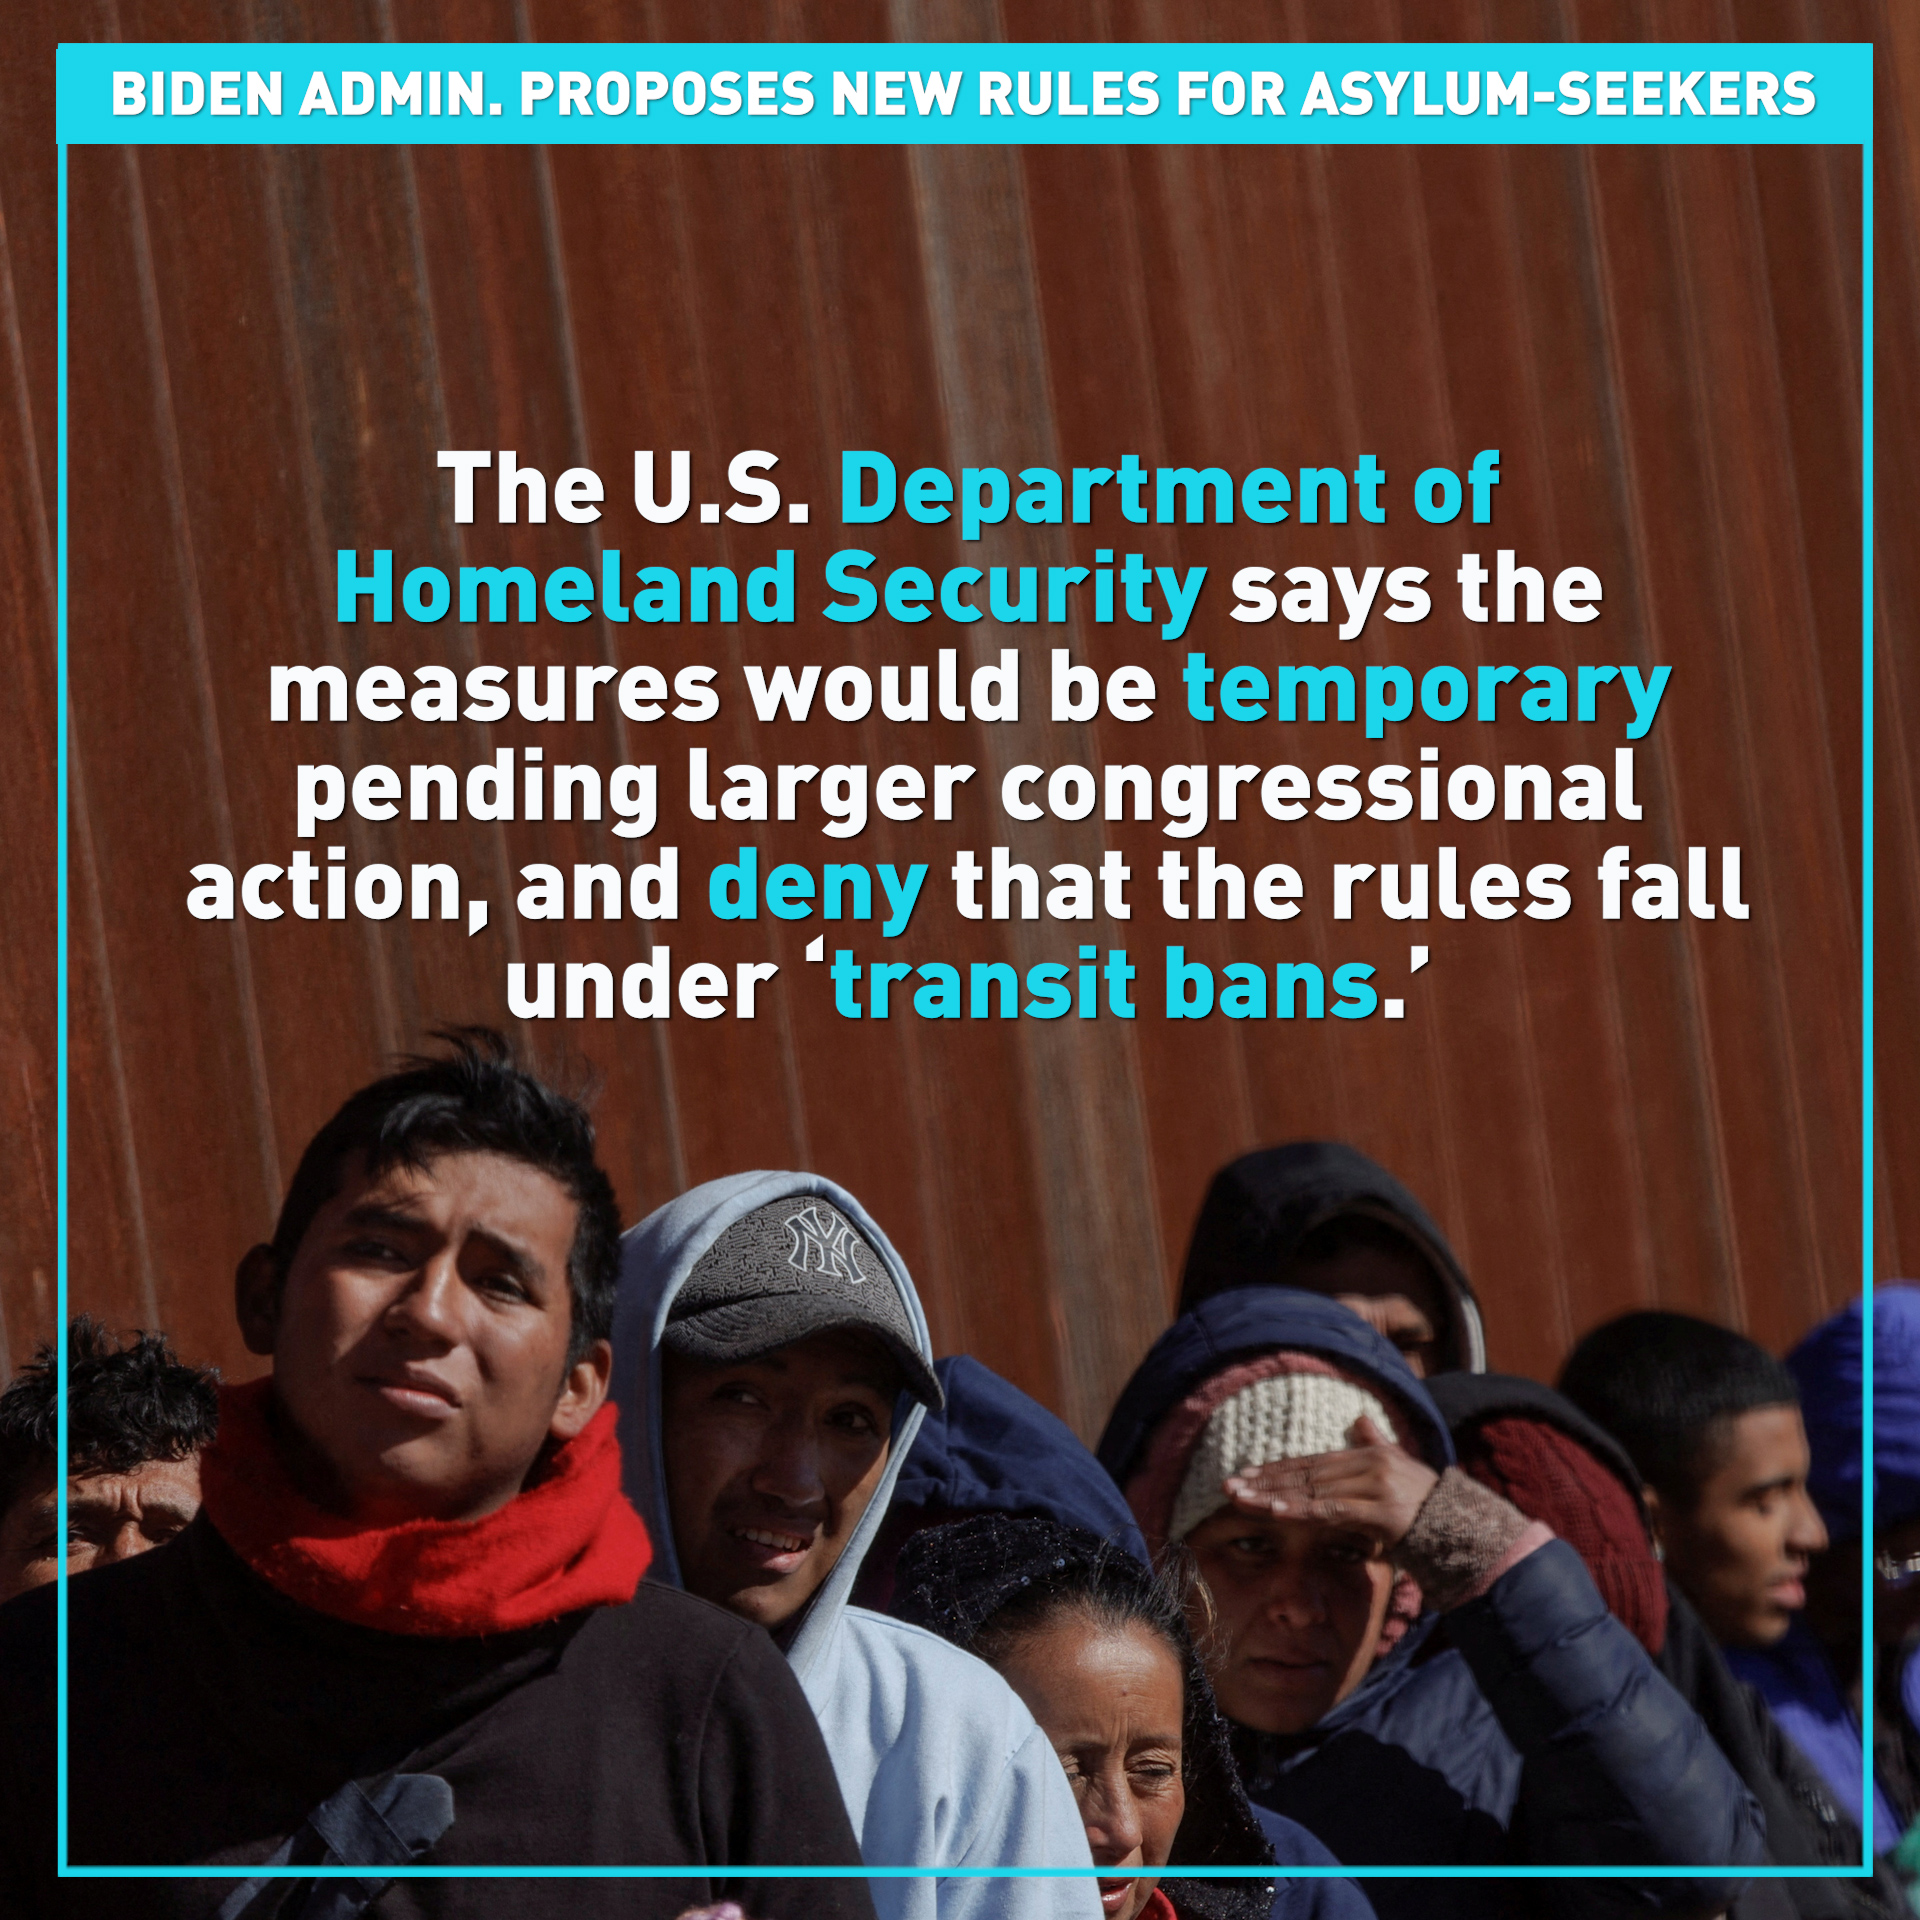 Biden administration proposes new rules for asylum seekers